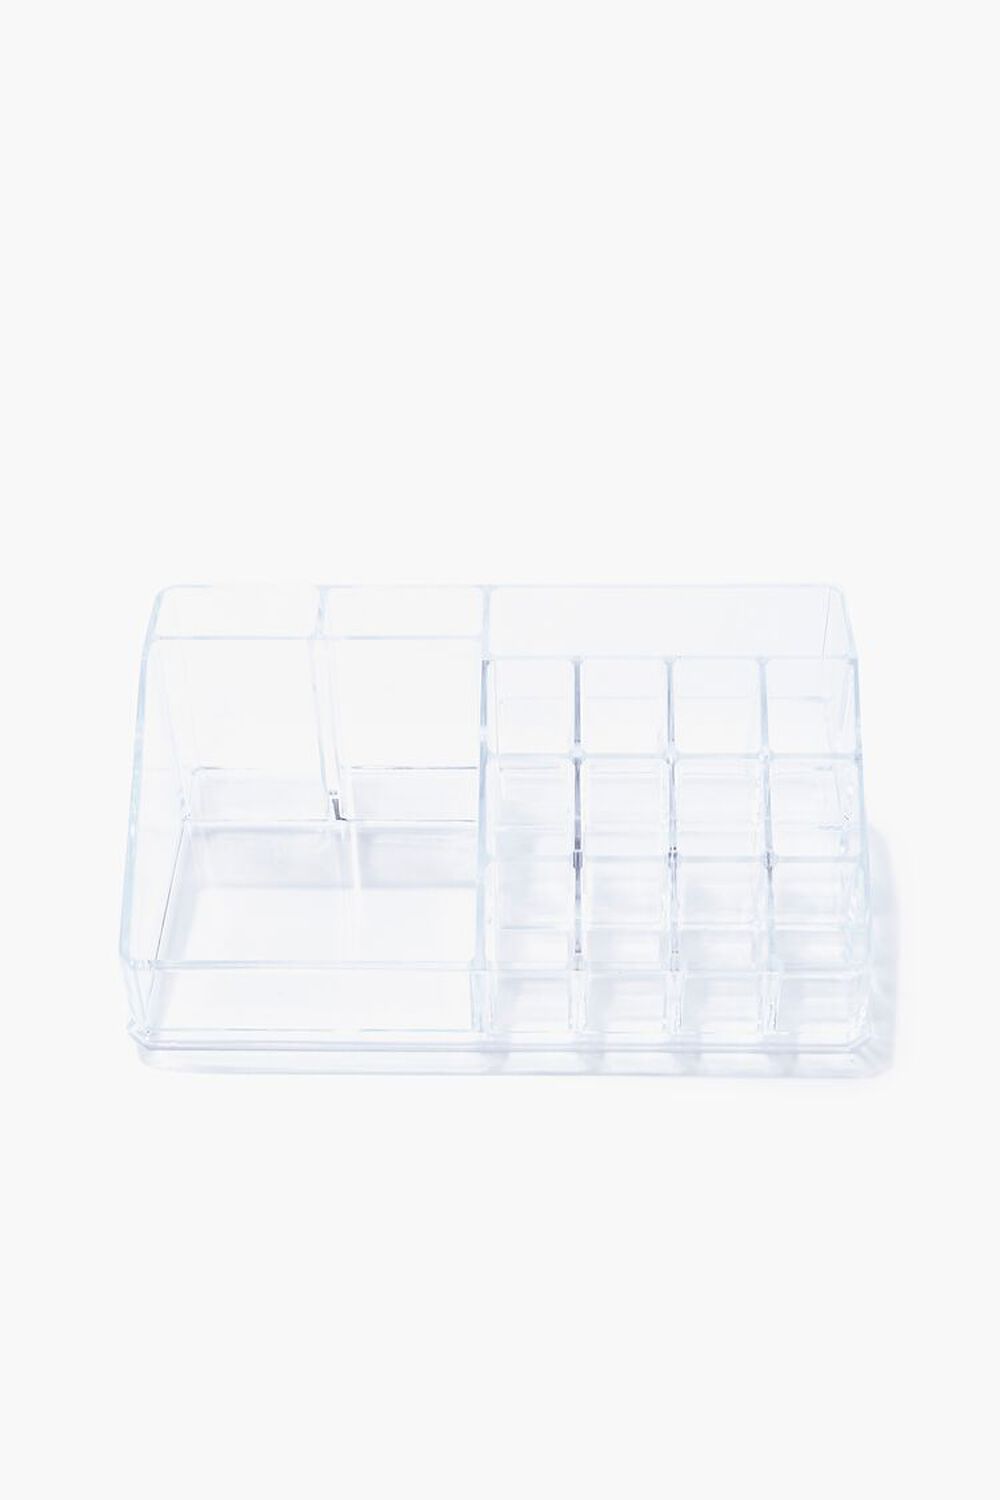 CLEAR Clear Cosmetic Organizer, image 1